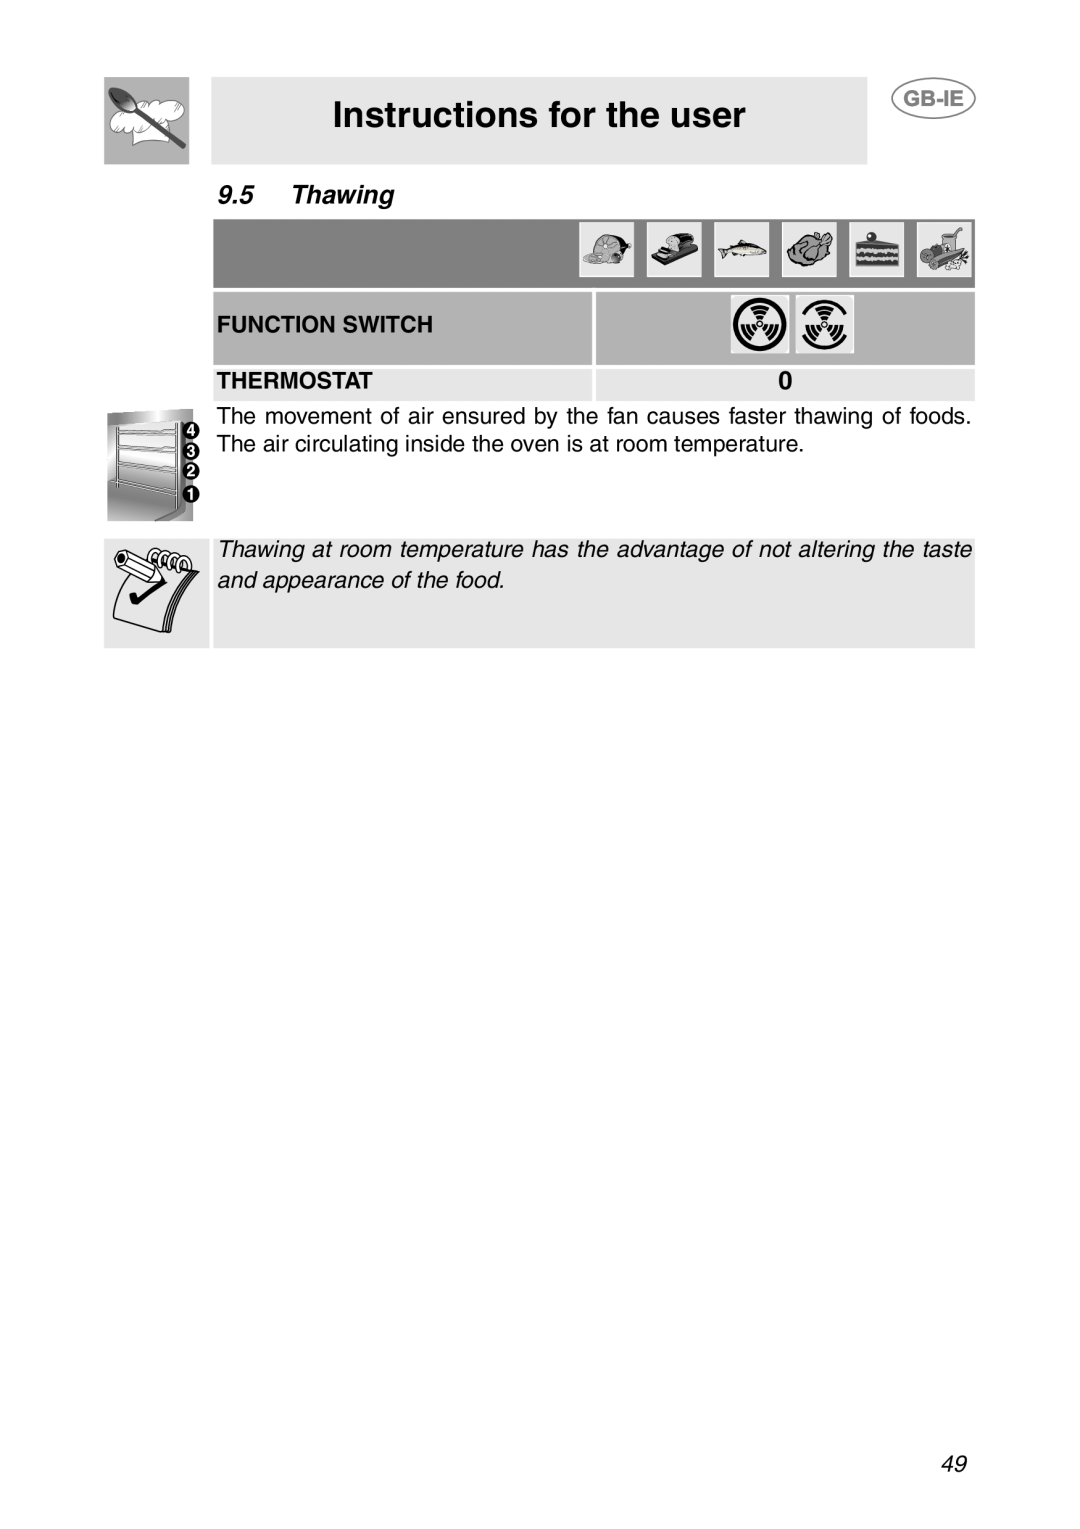 Smeg S200EB/1, S200/1 manual 9.5Thawing, Instructions for the user, Function Switch, Thermostat 